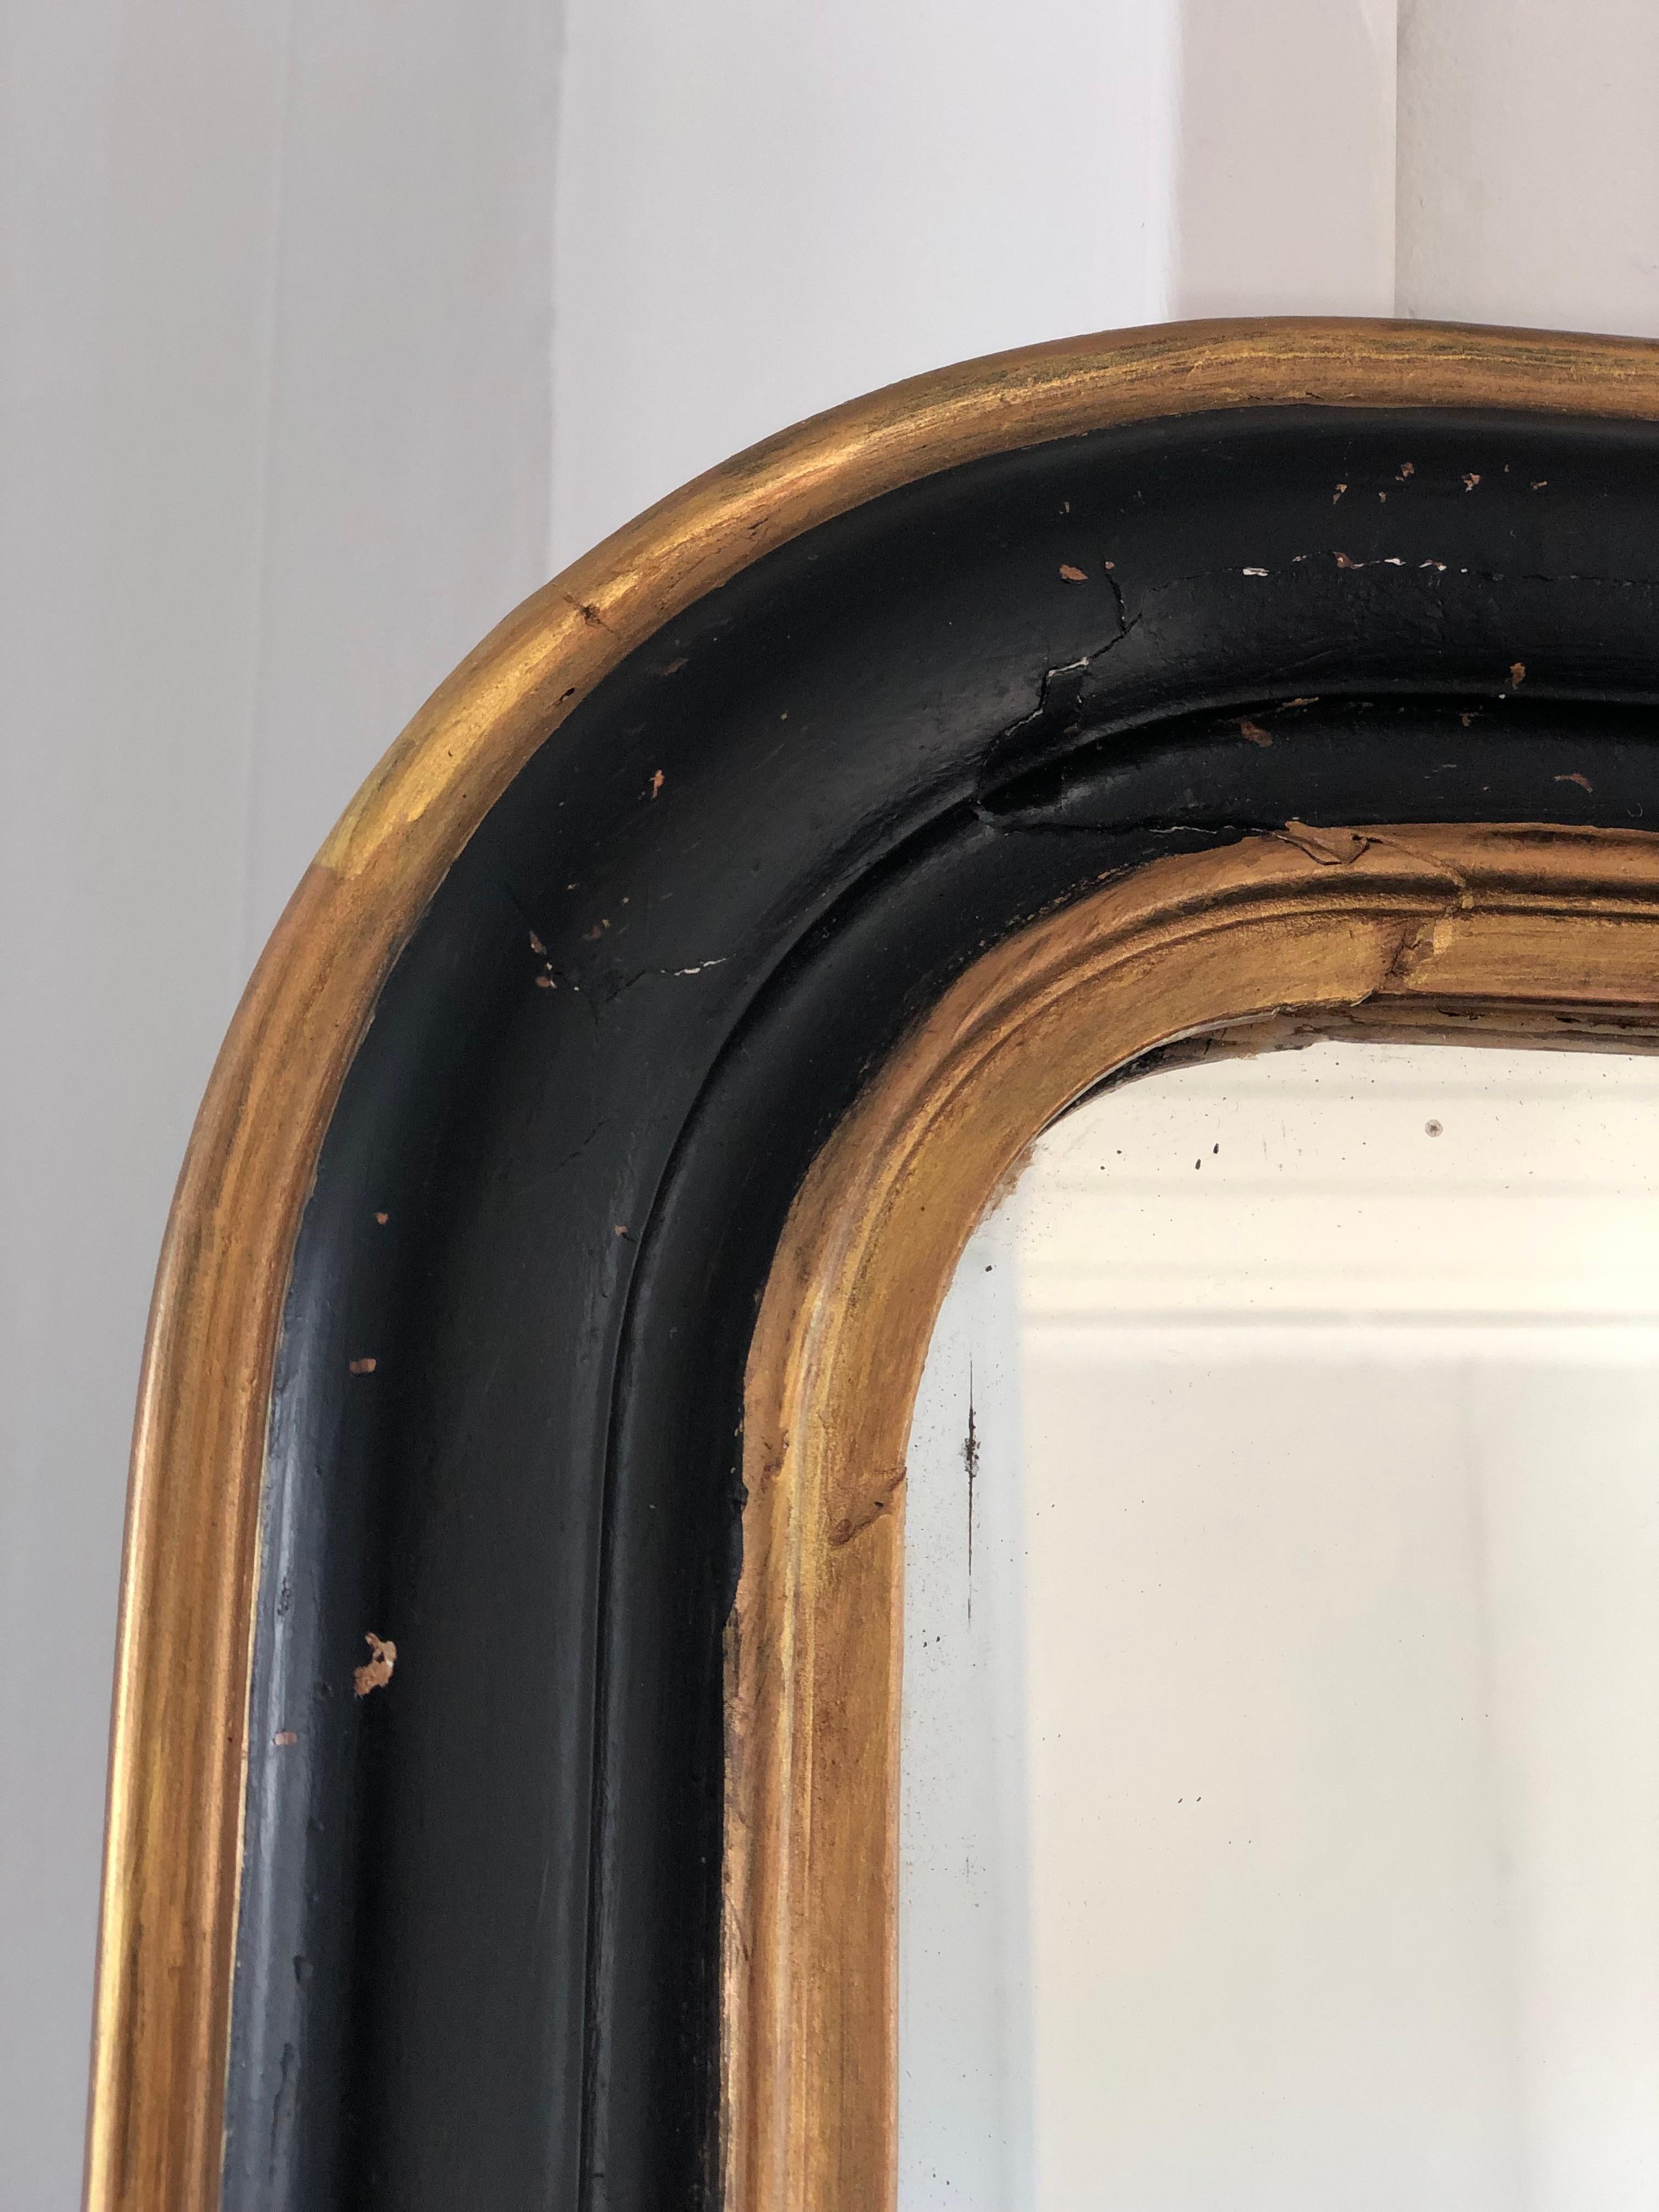 Gilt  Antique Louis Philippe Mirror In Black and Gold France Late 19th Century 72/140 For Sale